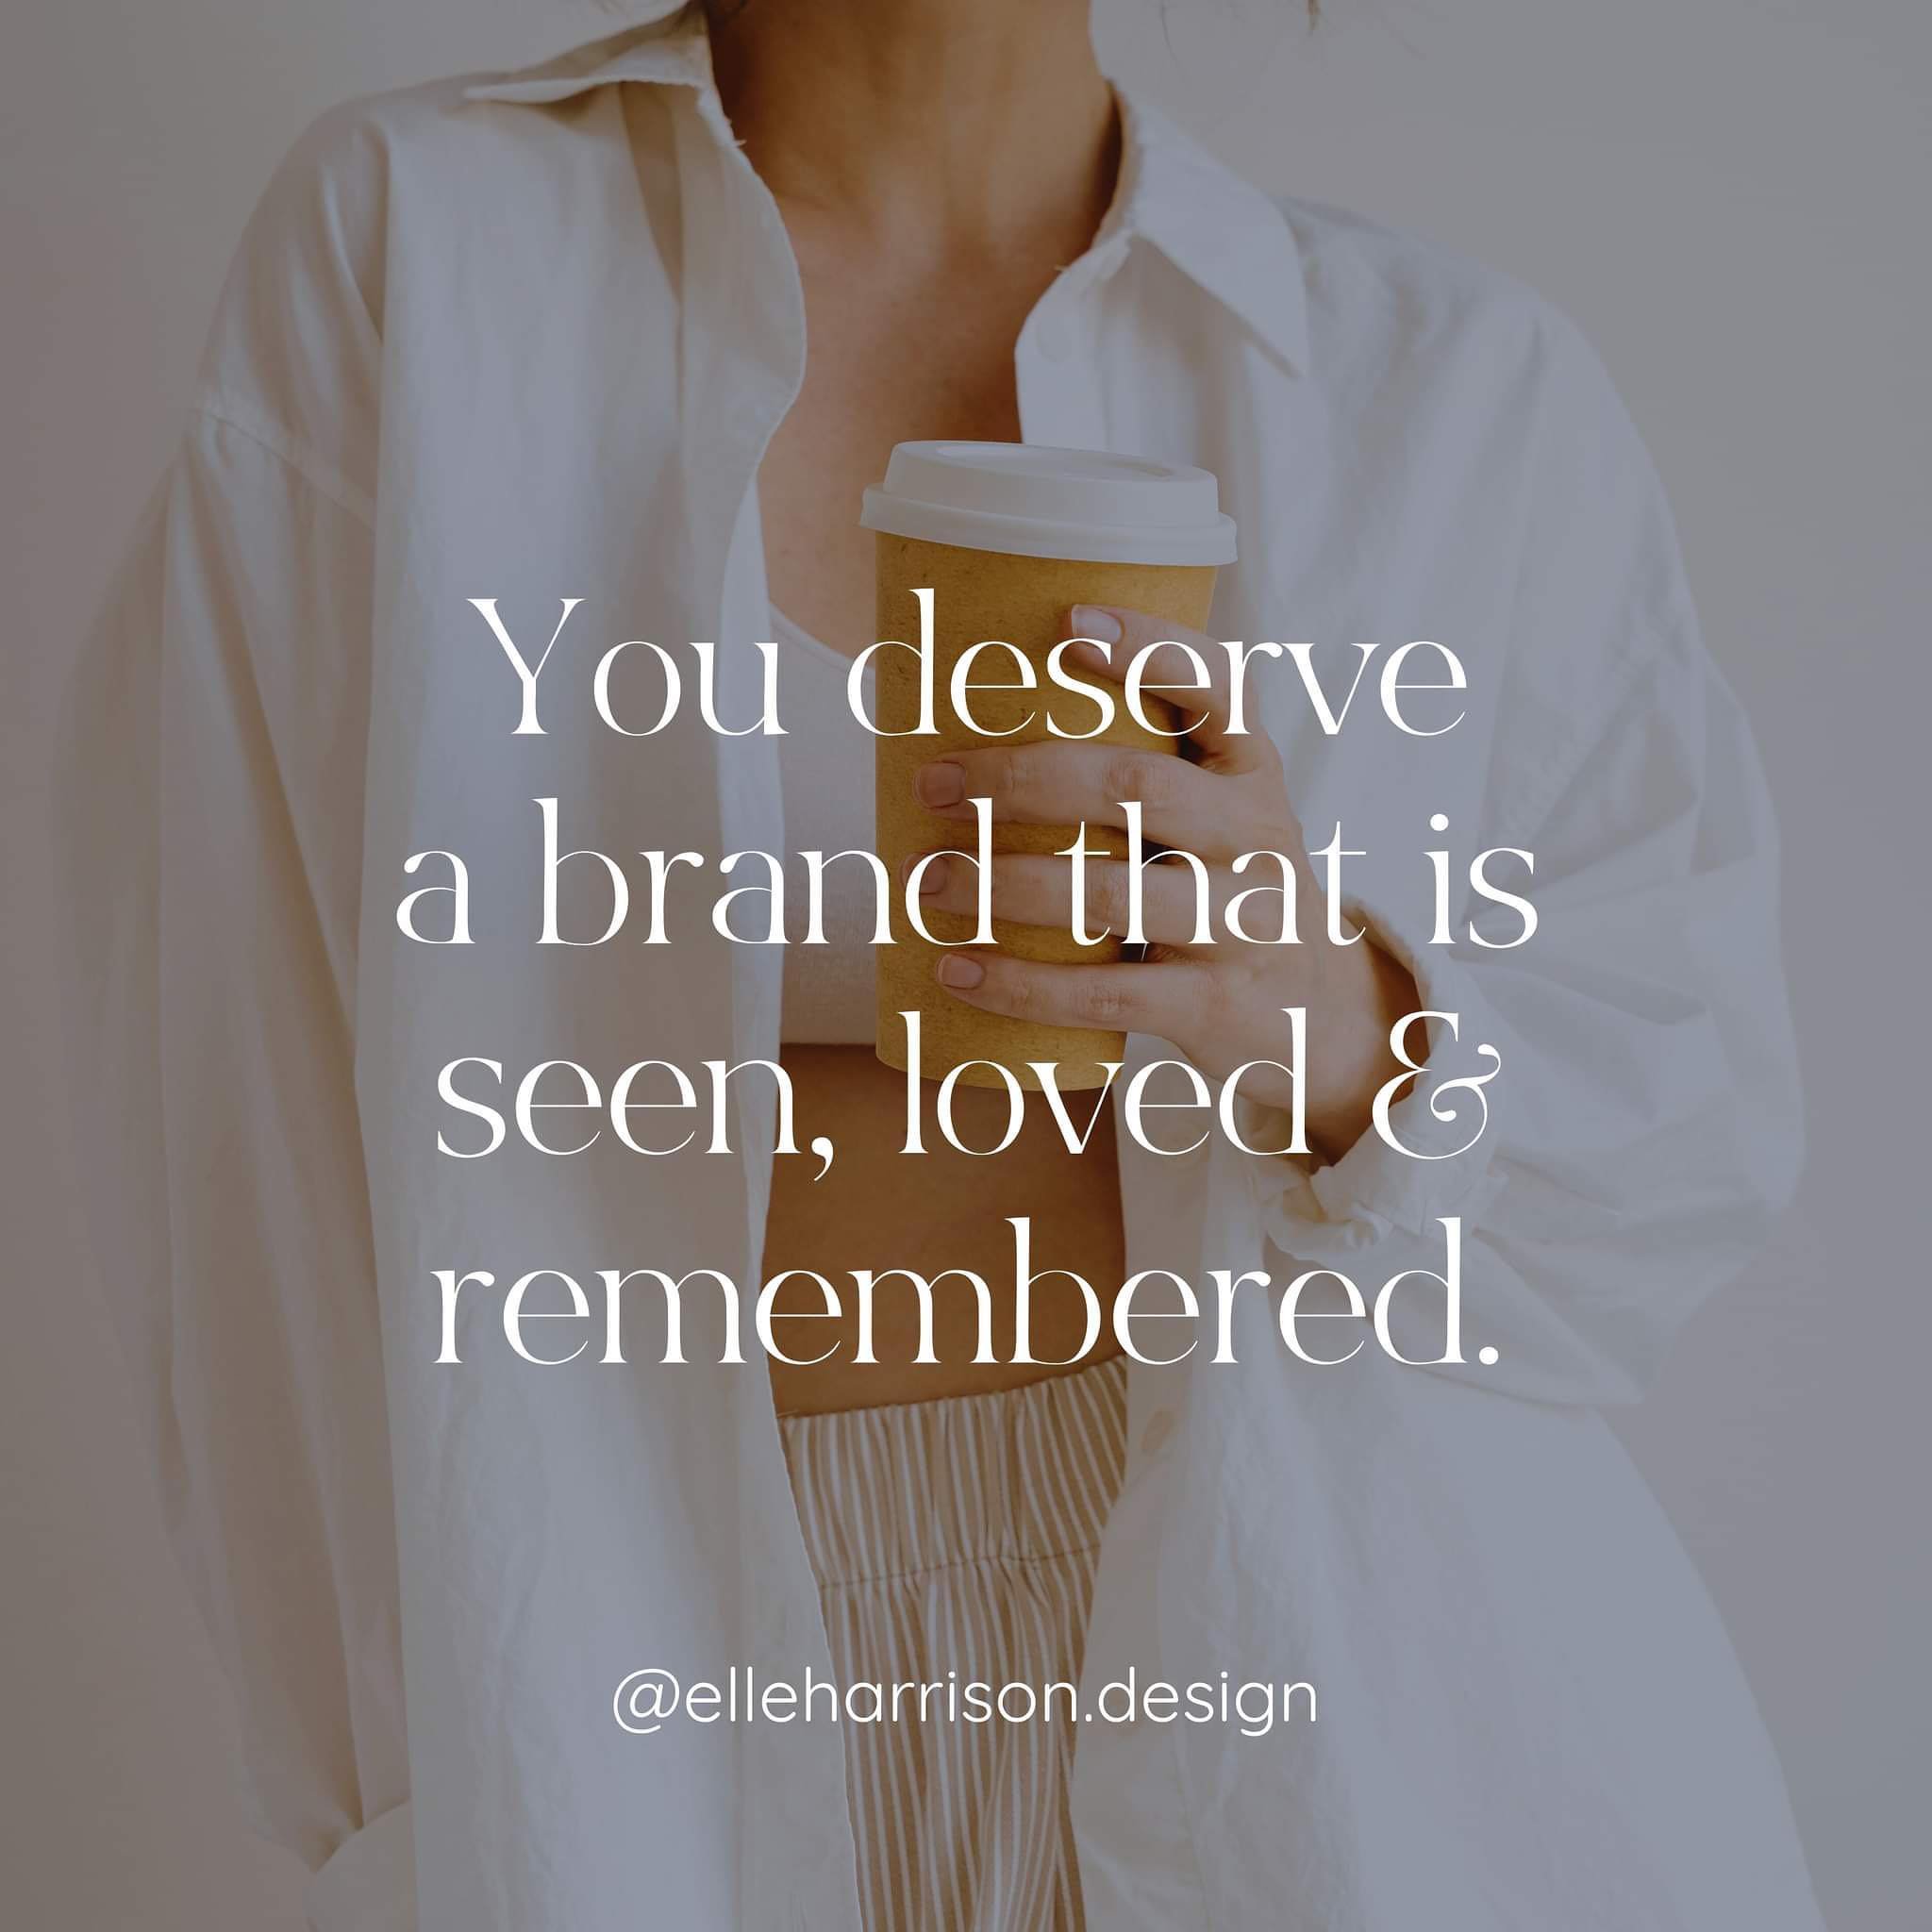 Don&rsquo;t underestimate the power of a strong brand. 

It&rsquo;s not just about marketing and advertising; it&rsquo;s about building a strong and authentic relationship with your audience. 

Your brand tells a story, and it should represent your v